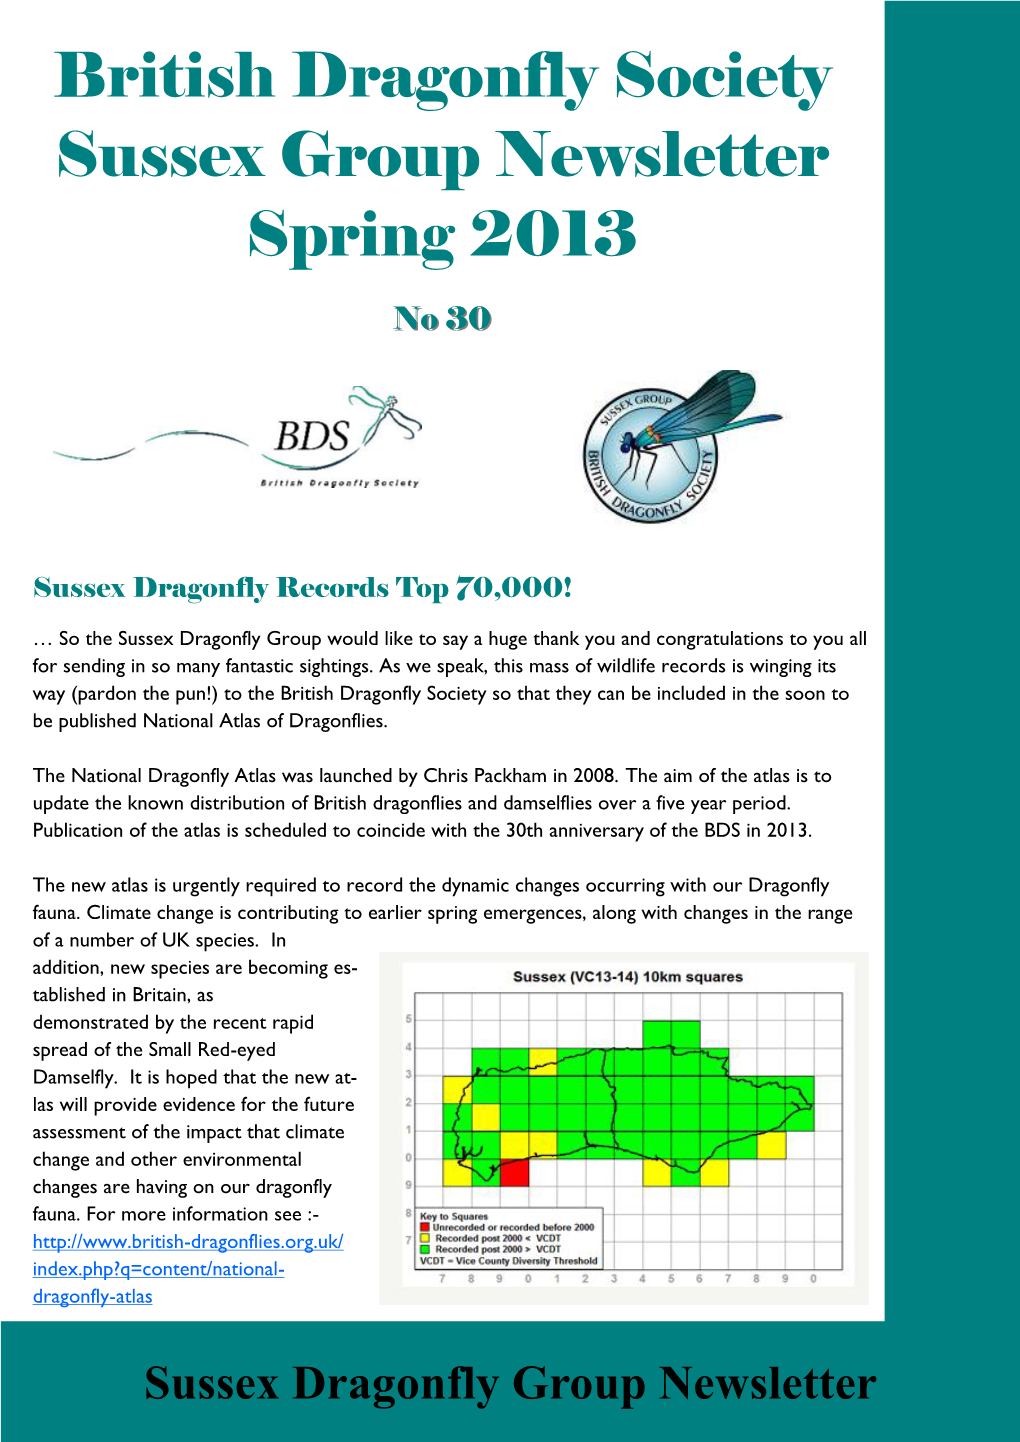 British Dragonfly Society Sussex Group Newsletter Spring 2013